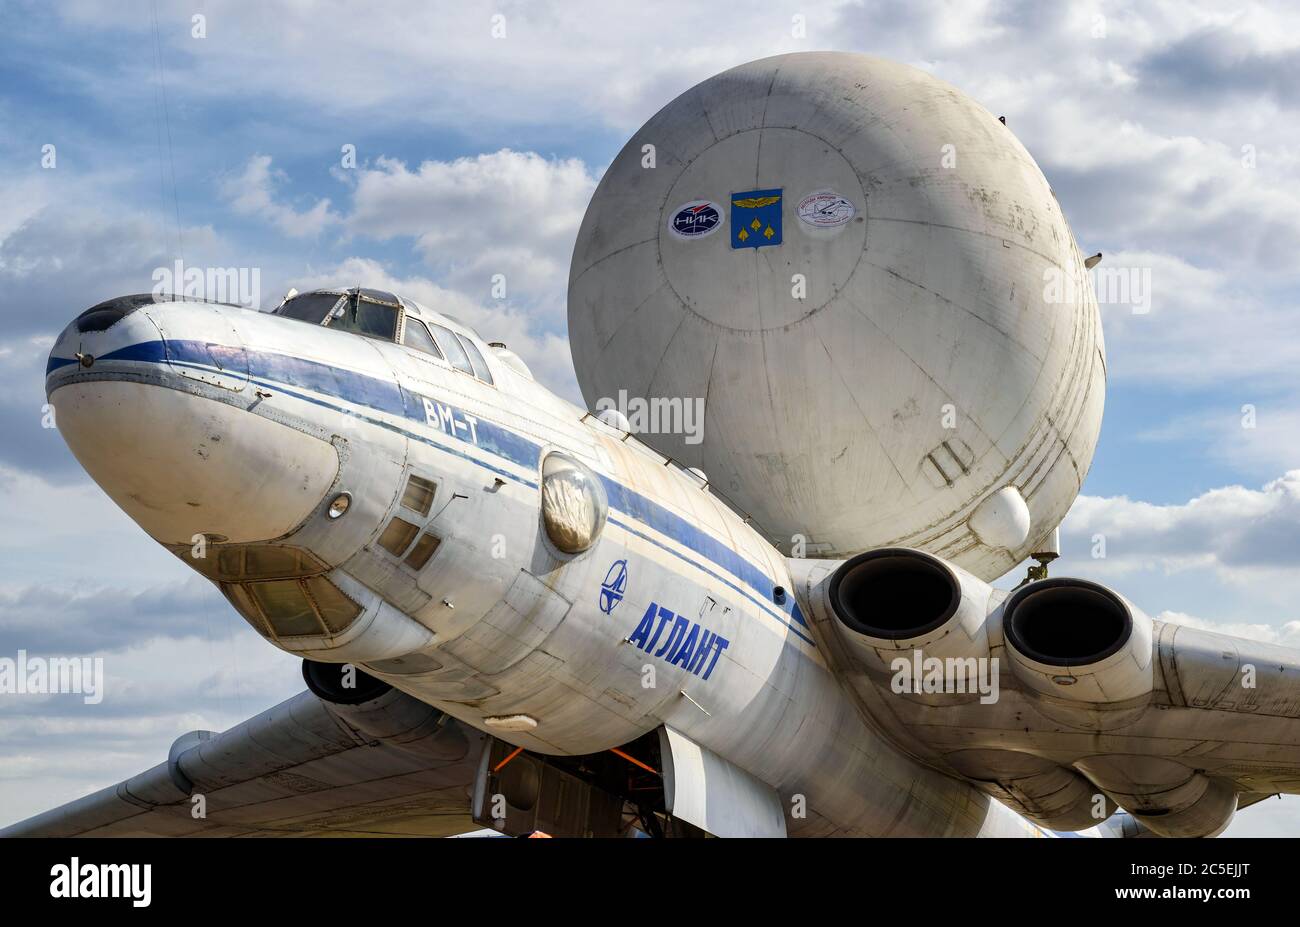 MOSCOW REGION - AUGUST 28, 2015: The Soviet strategic-airlift airplane Myasishchev VM-T Atlant at the International Aviation and Space Salon (MAKS) in Stock Photo